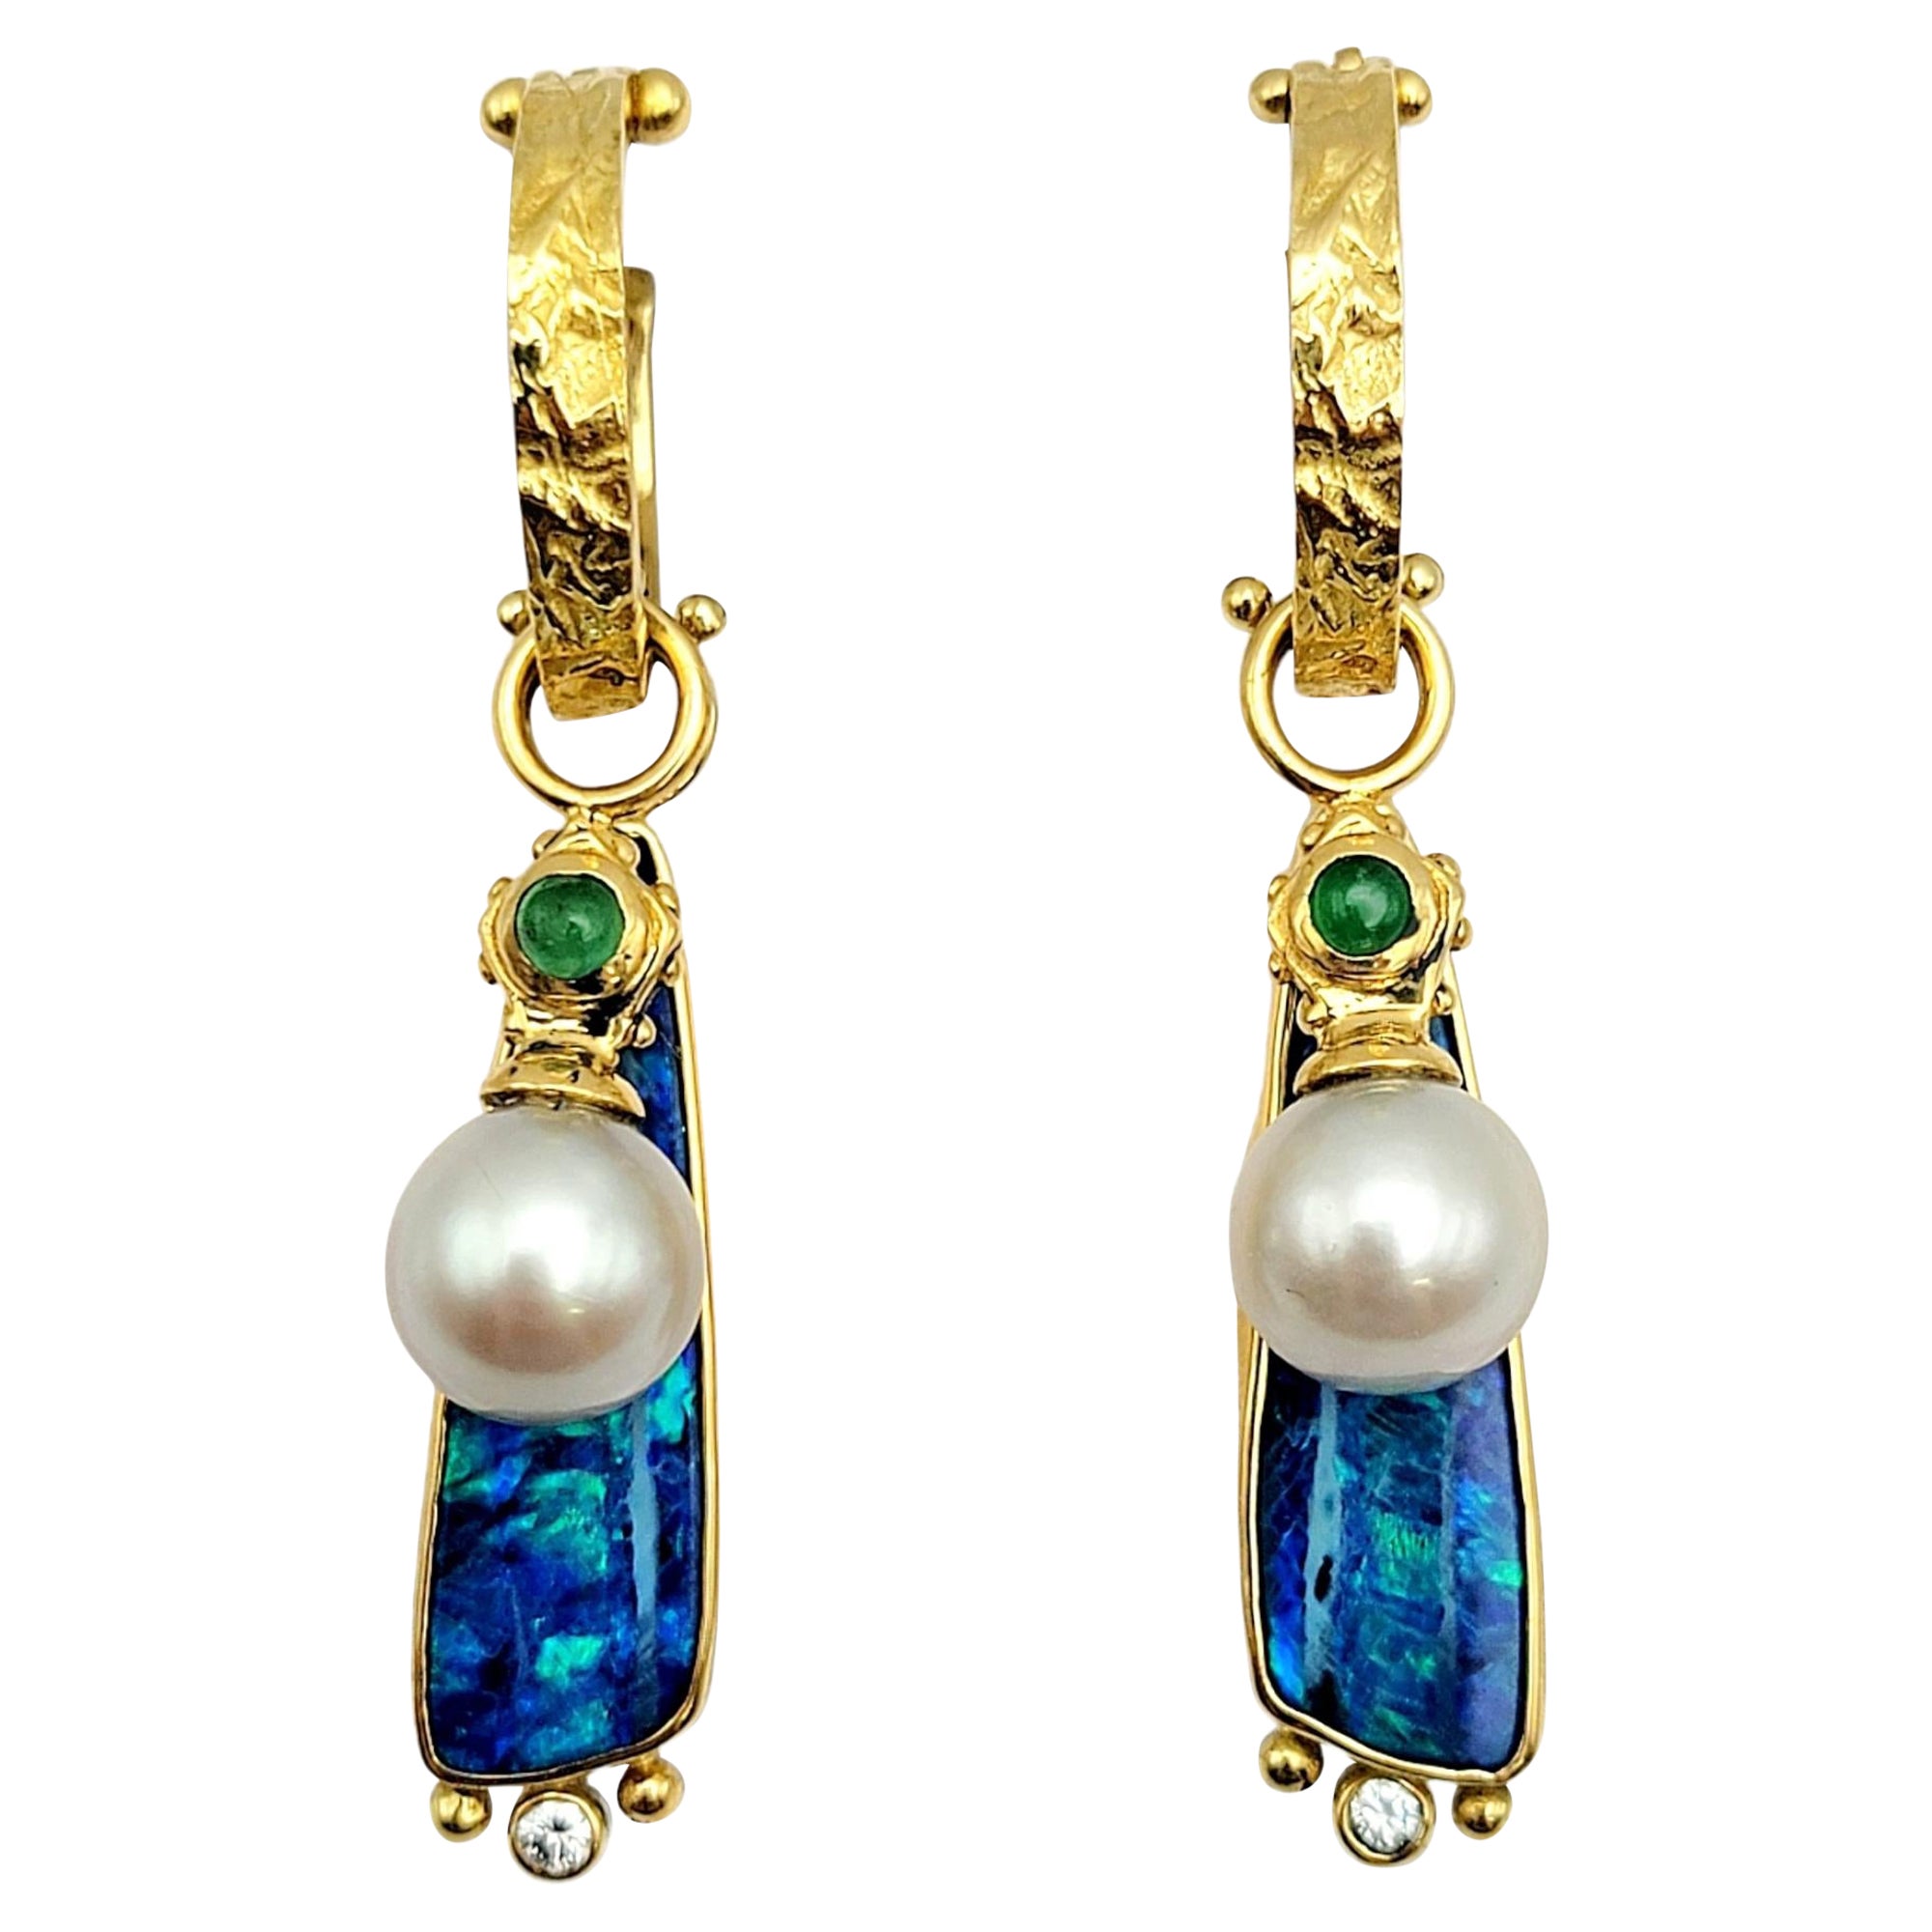 Dangle 18 Karat Gold Earrings with Opals, Pearls and Diamonds Interchangeable